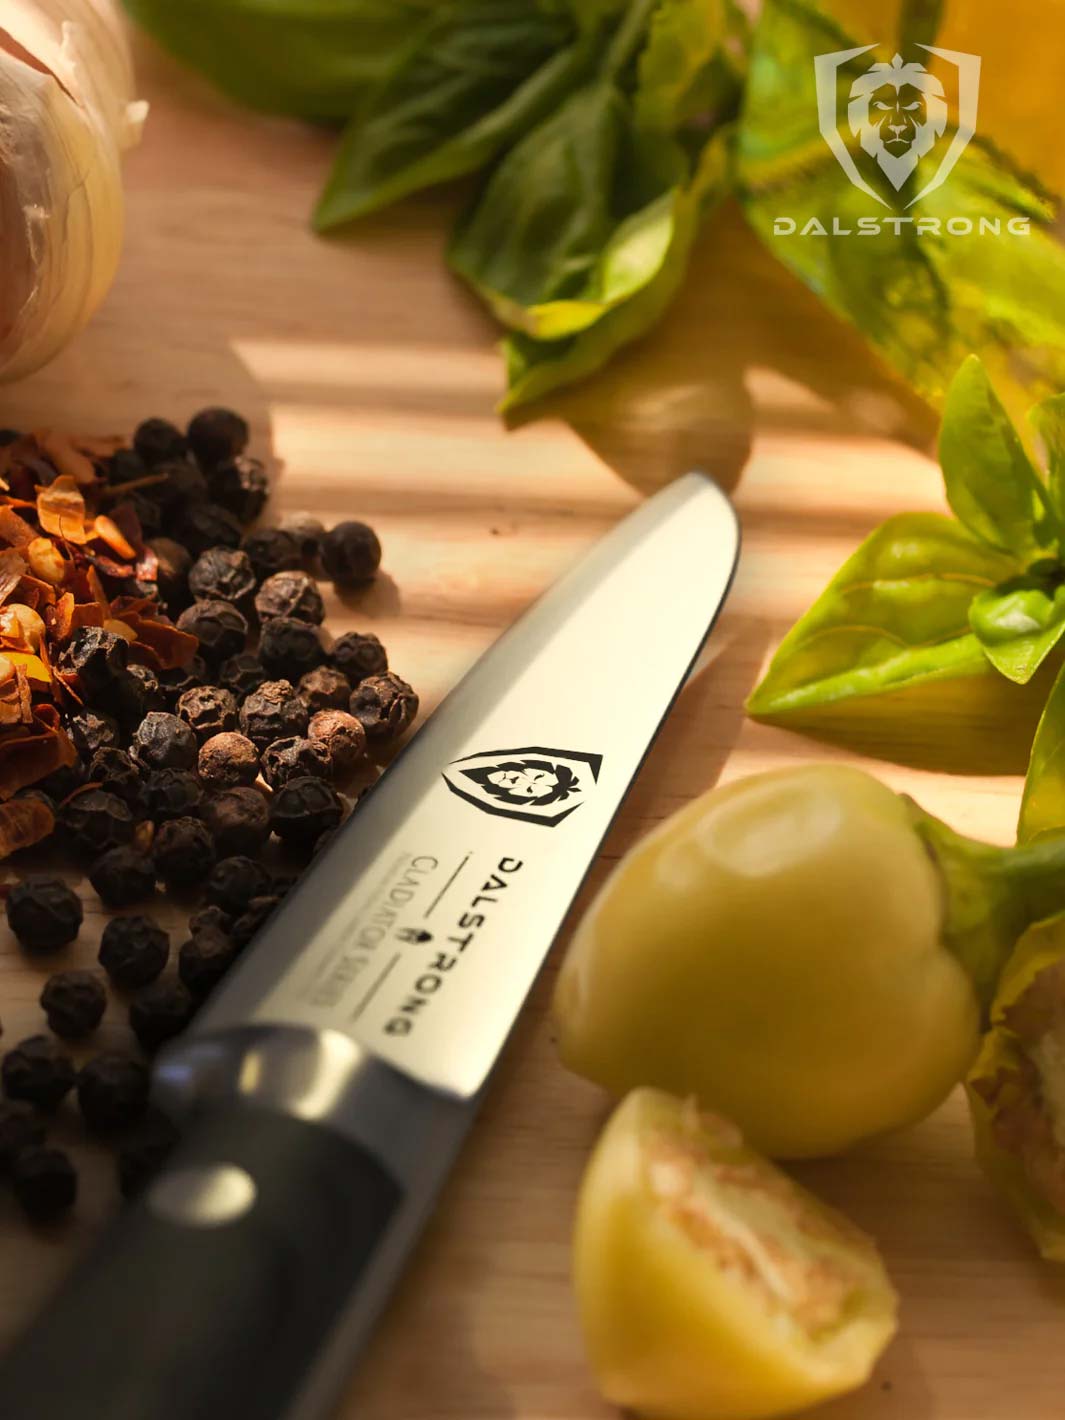 Dalstrong gladiator series 3.5 inch paring knife with black handle in the middle of black peppers and tomatoes.